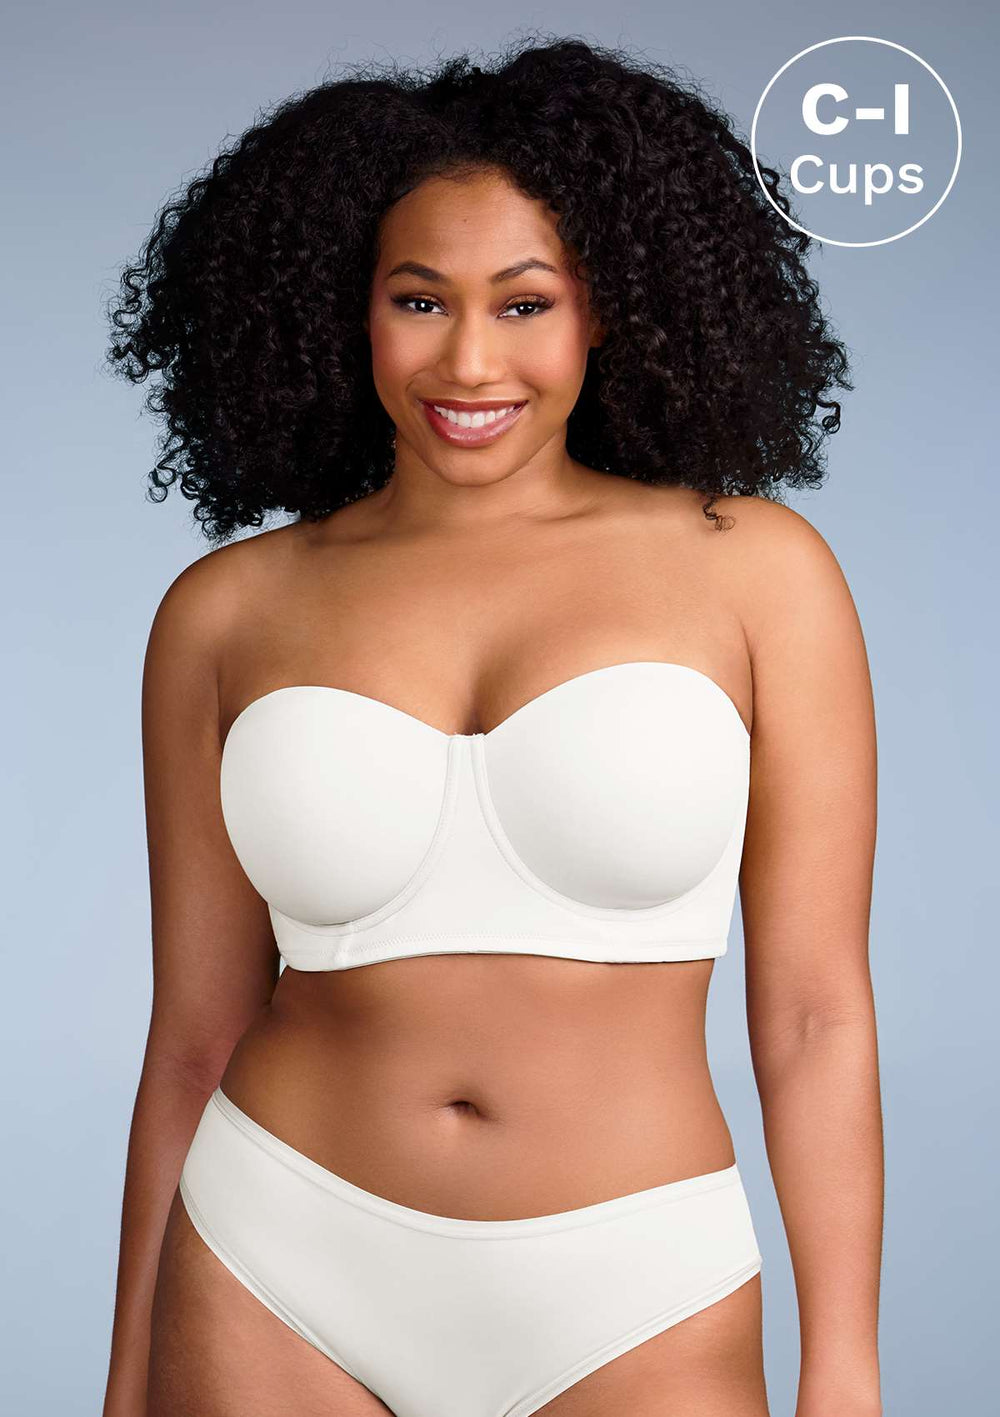 Back Size 36 Cup Size F Strapless And Multiway, Bras